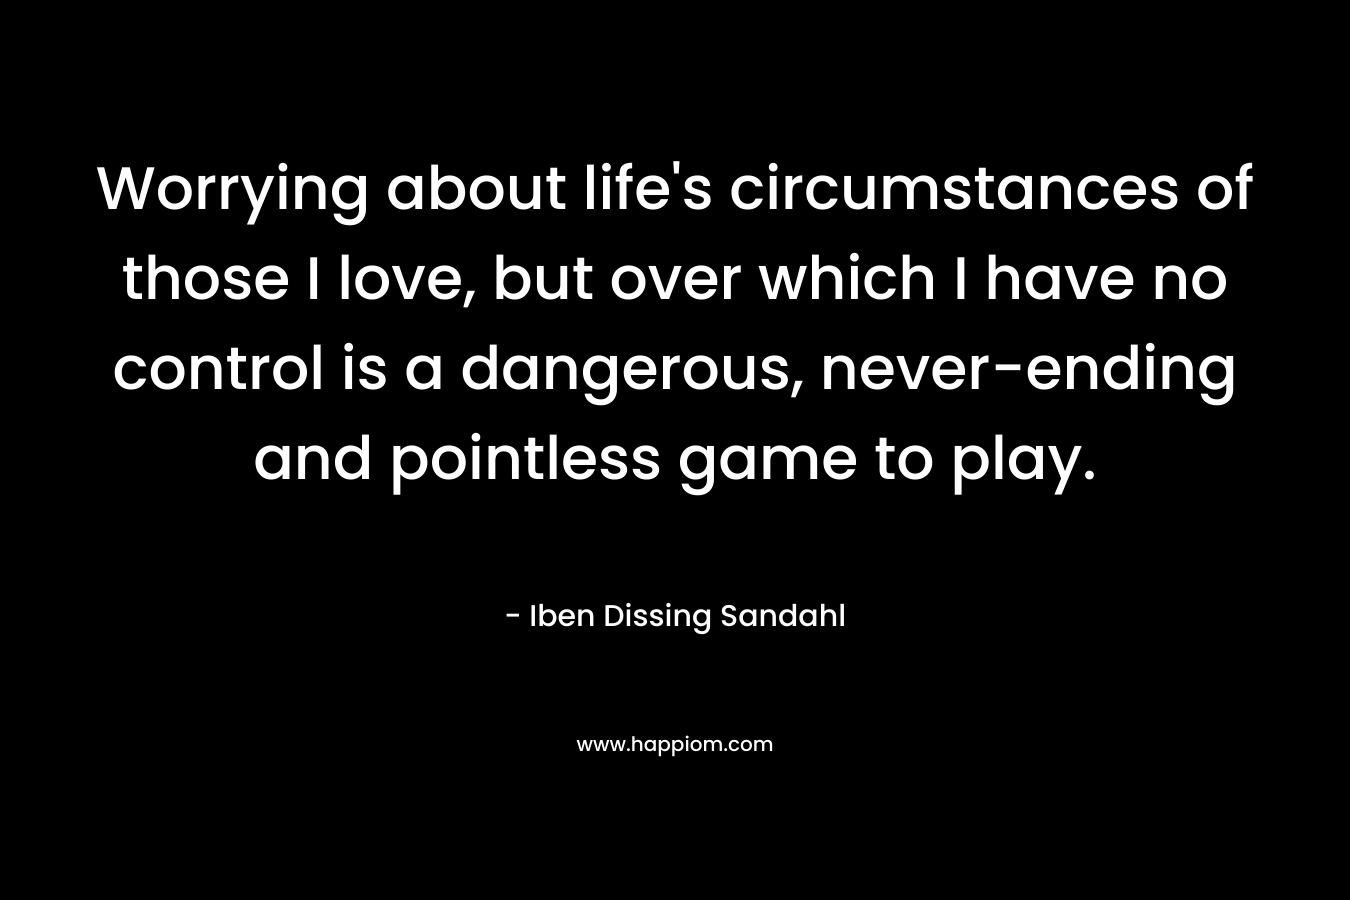 Worrying about life's circumstances of those I love, but over which I have no control is a dangerous, never-ending and pointless game to play.